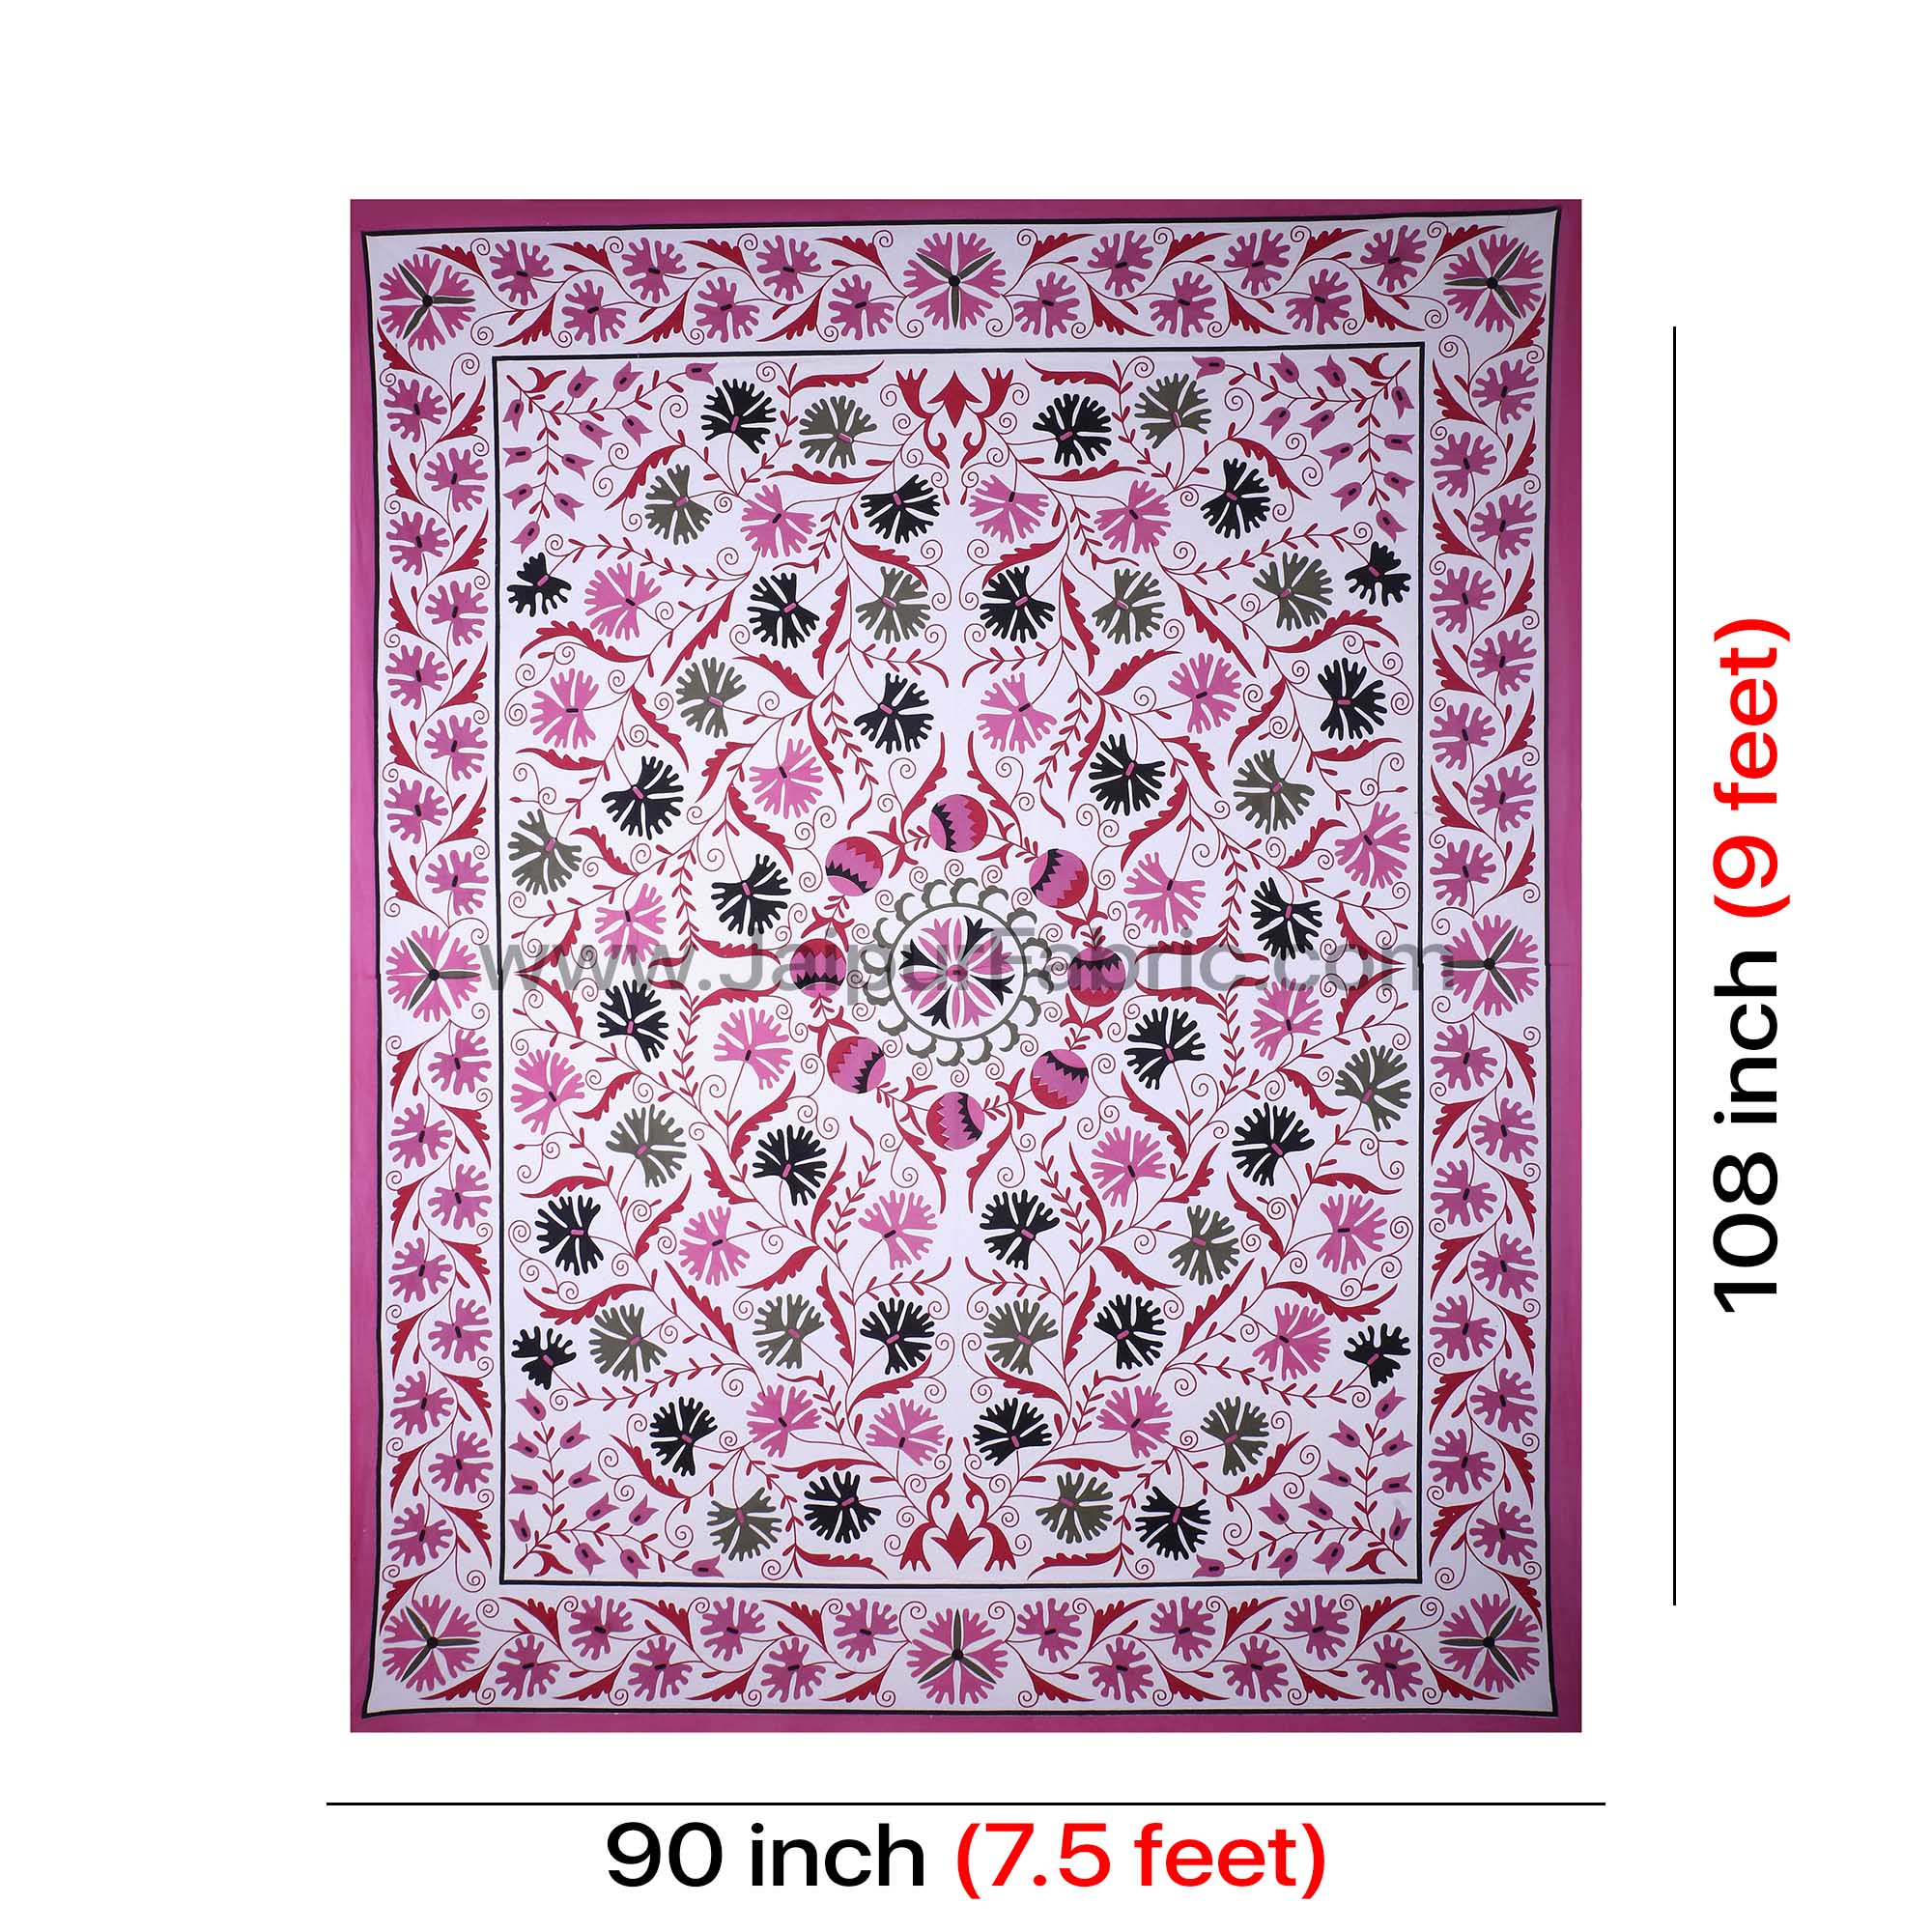 Pink Festive Vibes Double Bedsheet